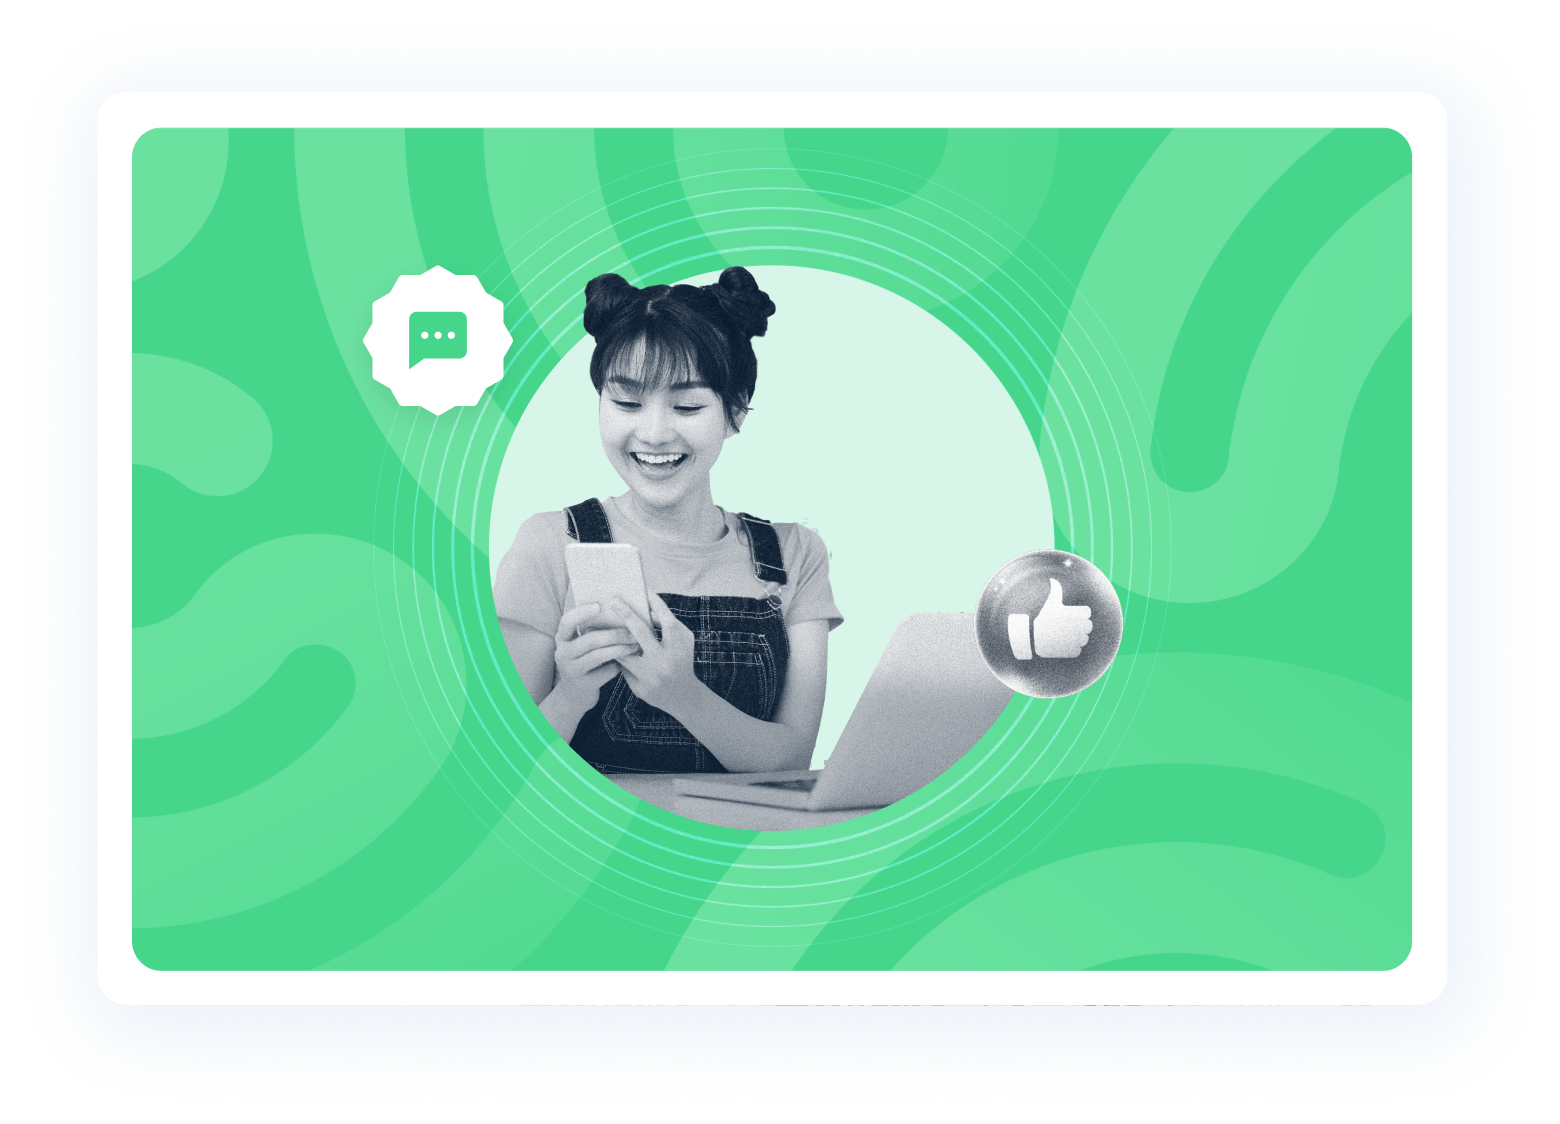 Beambox graphic showing a customer sitting at a computer, holding a smartphone and reacting to a notification with a smile.